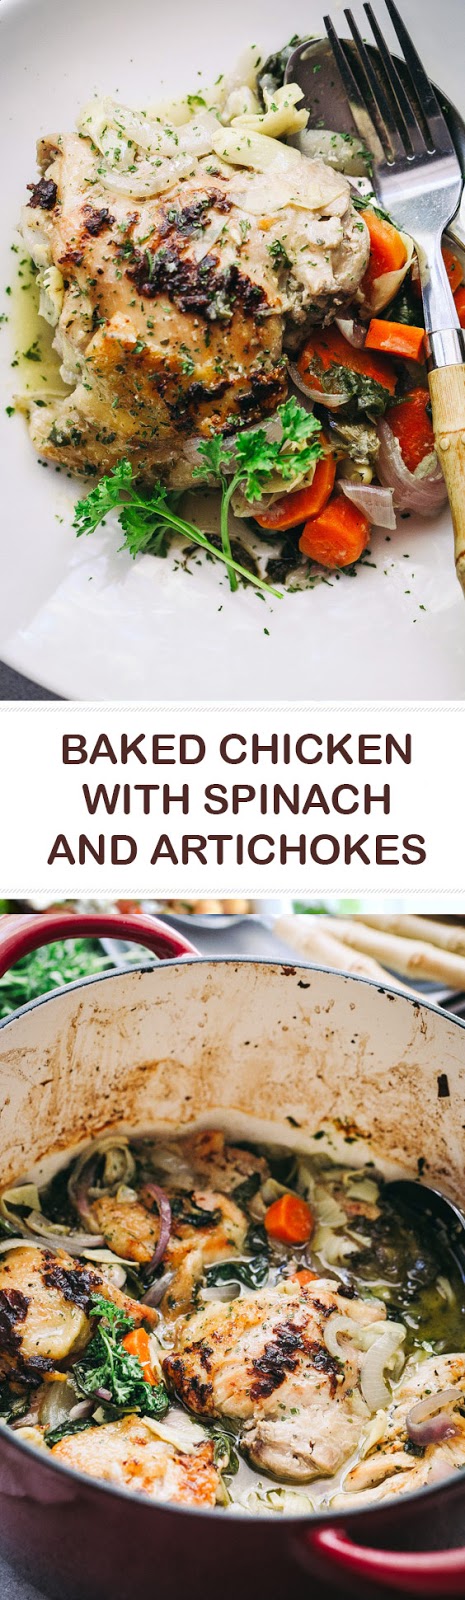 Baked Chicken with Spinach and Artichokes